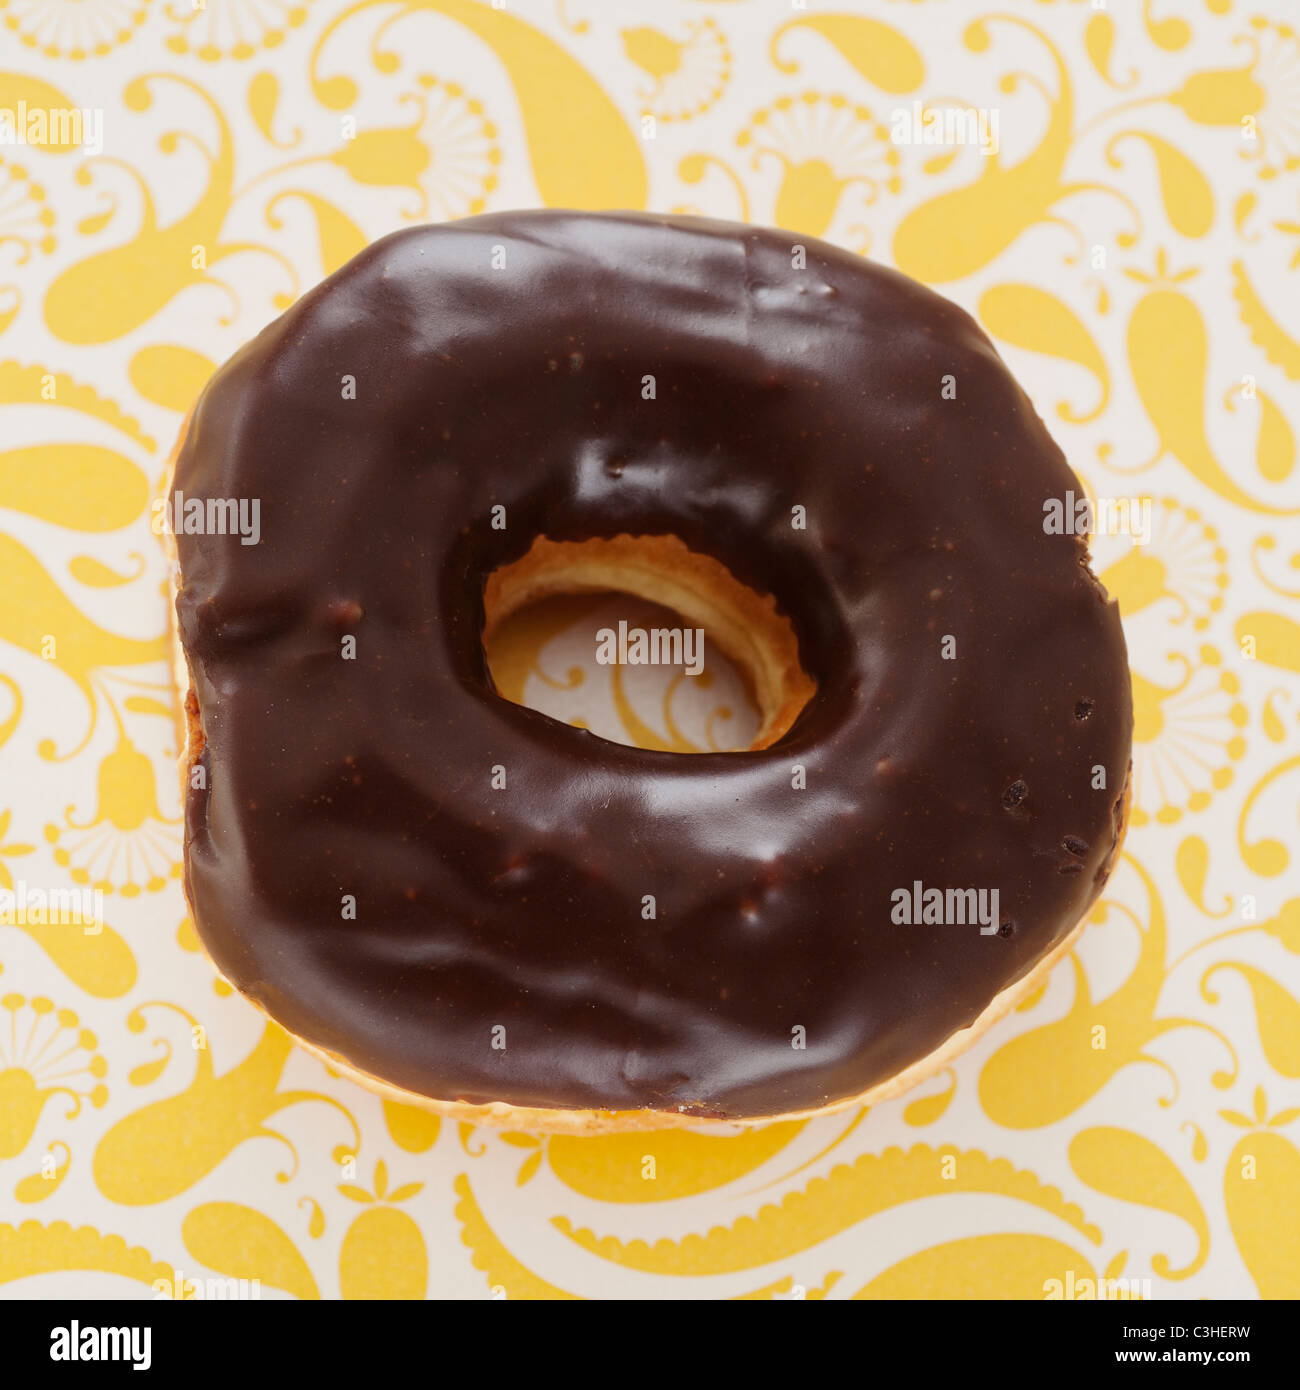 Studio shot of chocolate donut on floral background Stock Photo